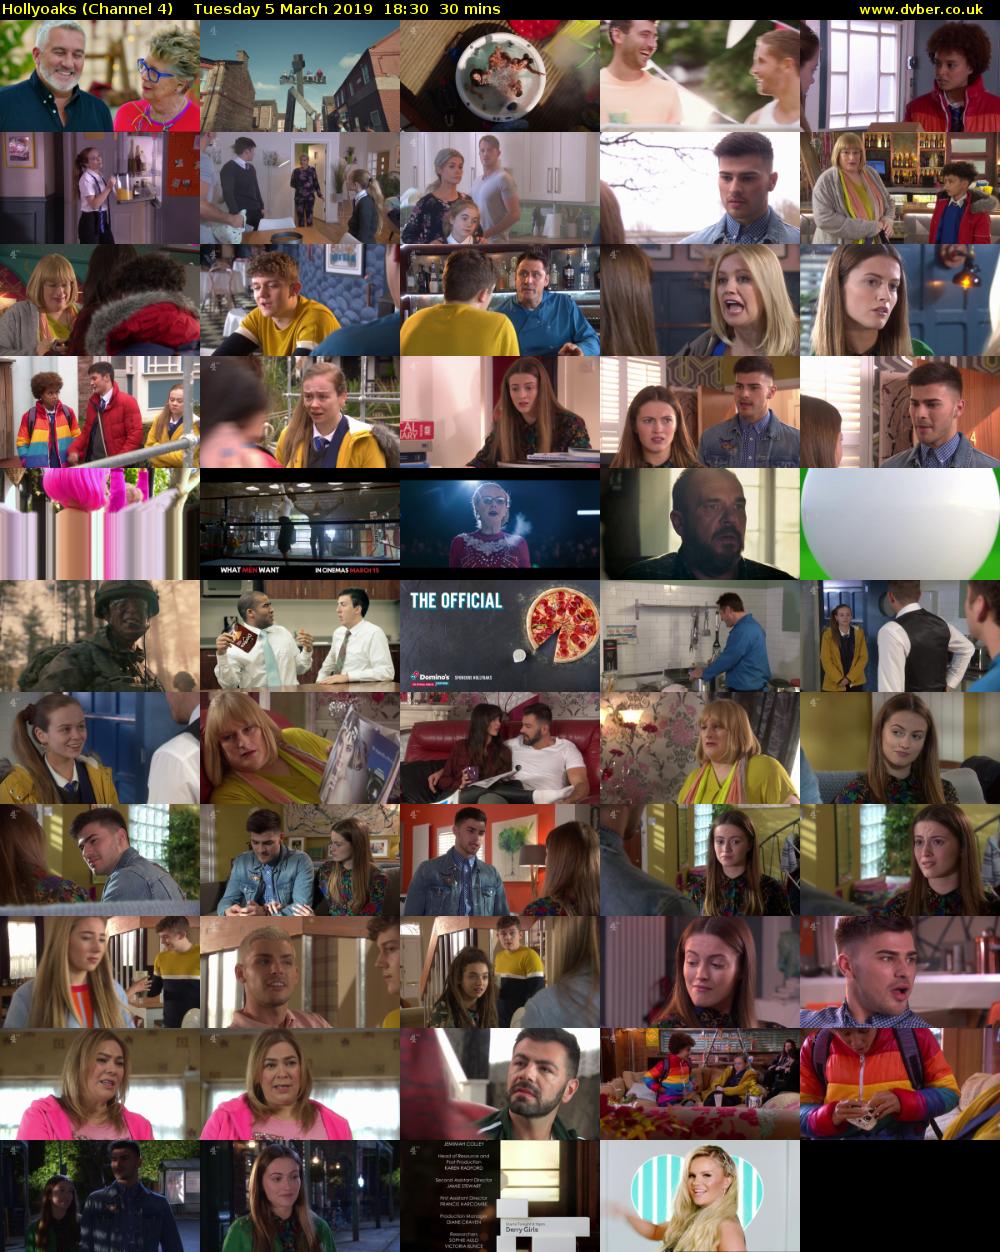 Hollyoaks (Channel 4) Tuesday 5 March 2019 18:30 - 19:00